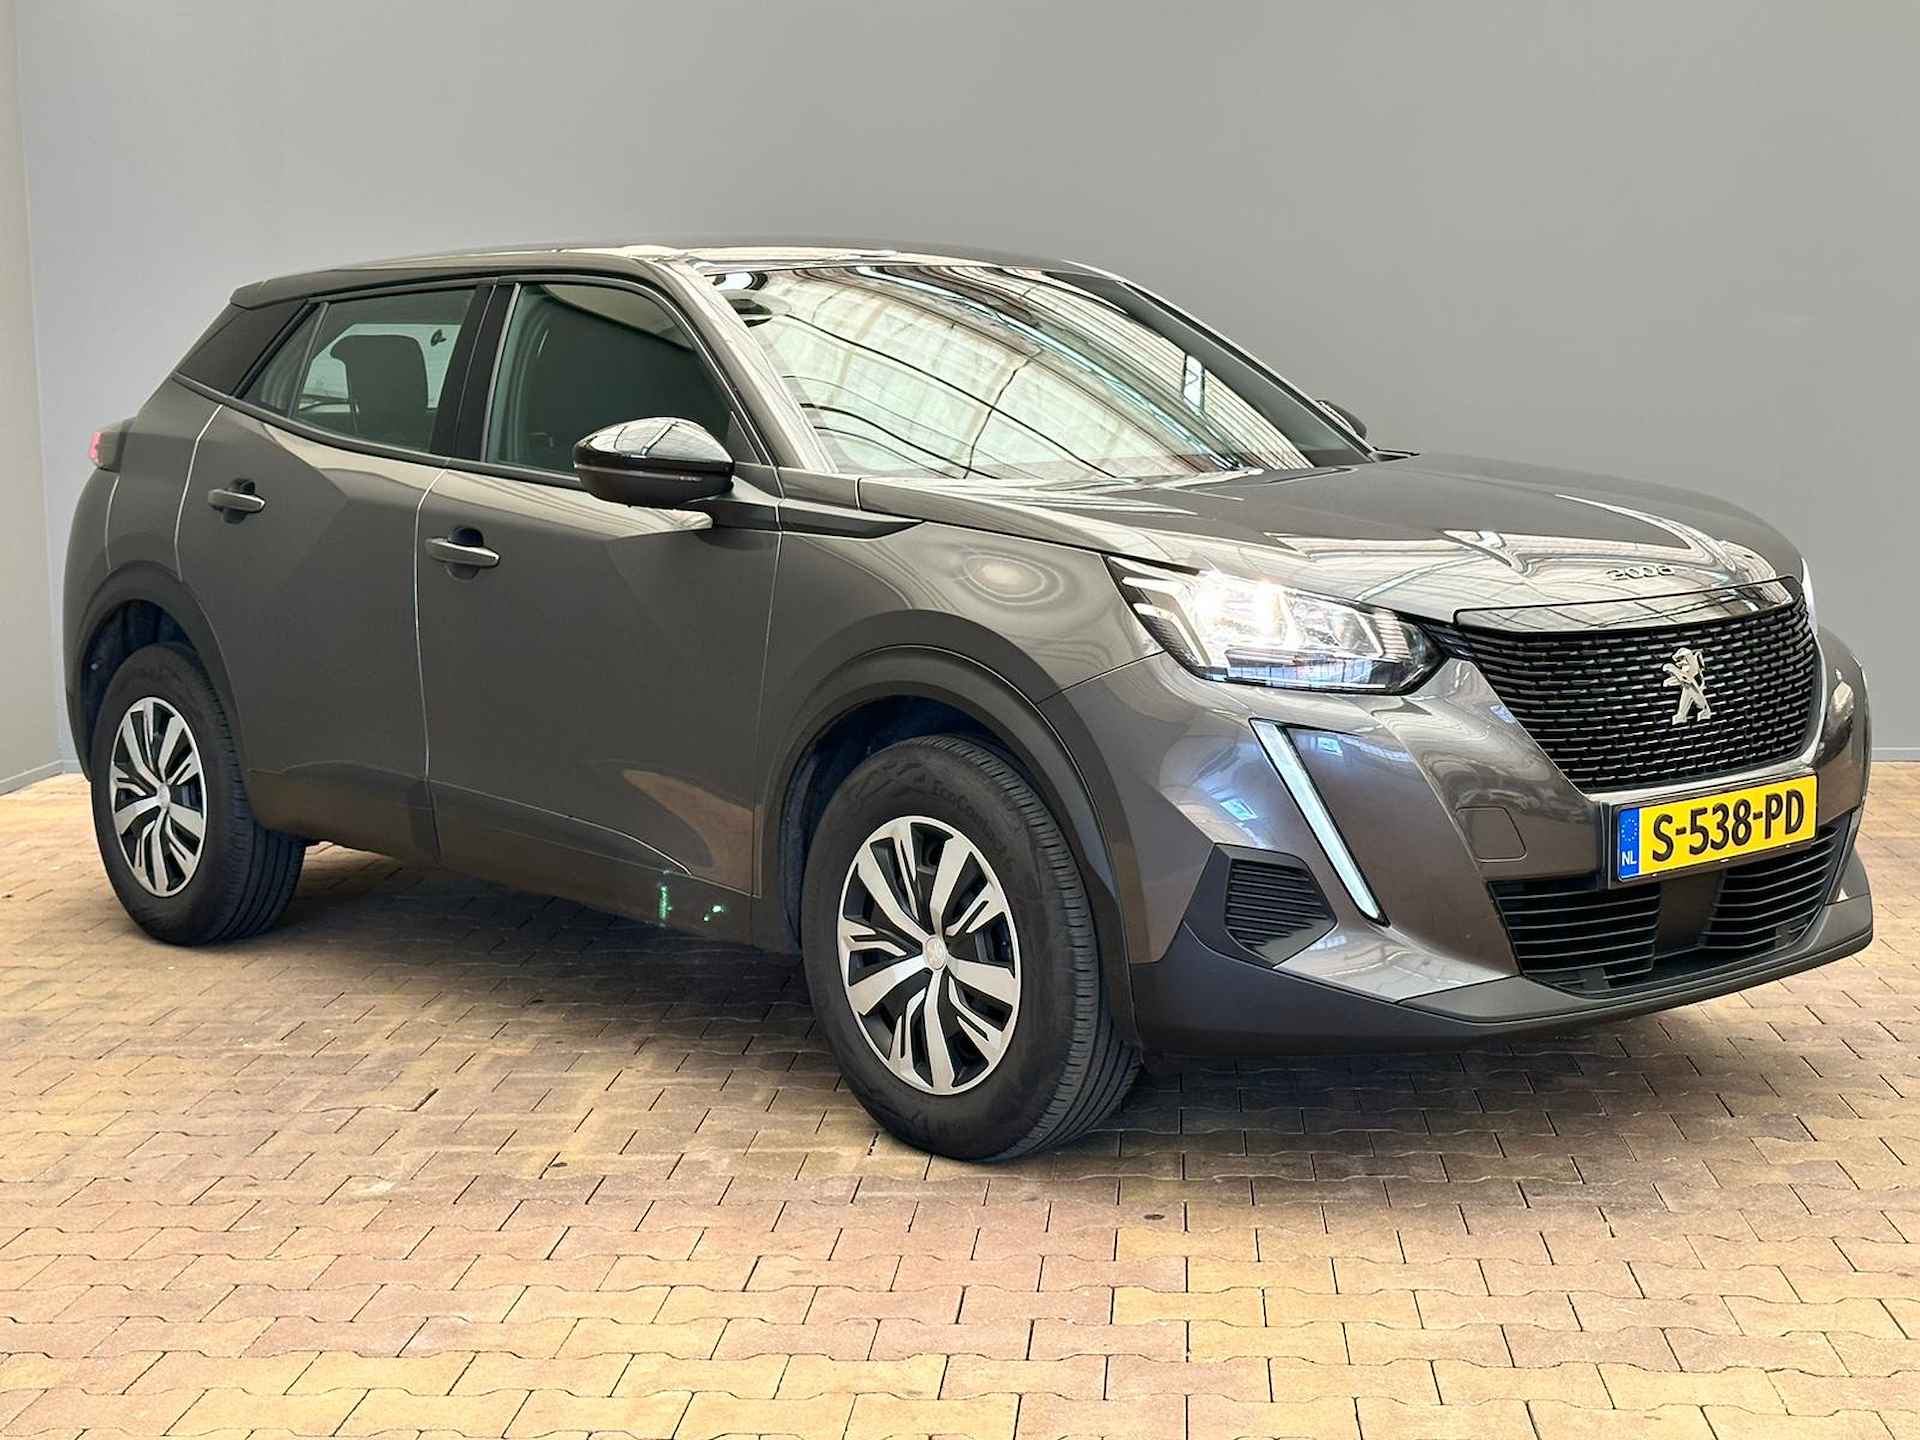 Peugeot 2008 1.2 100PK Active | Parkeersensoren Achter | Apple/Android Carplay | Airco | Cruise | LED | DAB | Bluetooth | Centrale Vergrendeling - 10/23